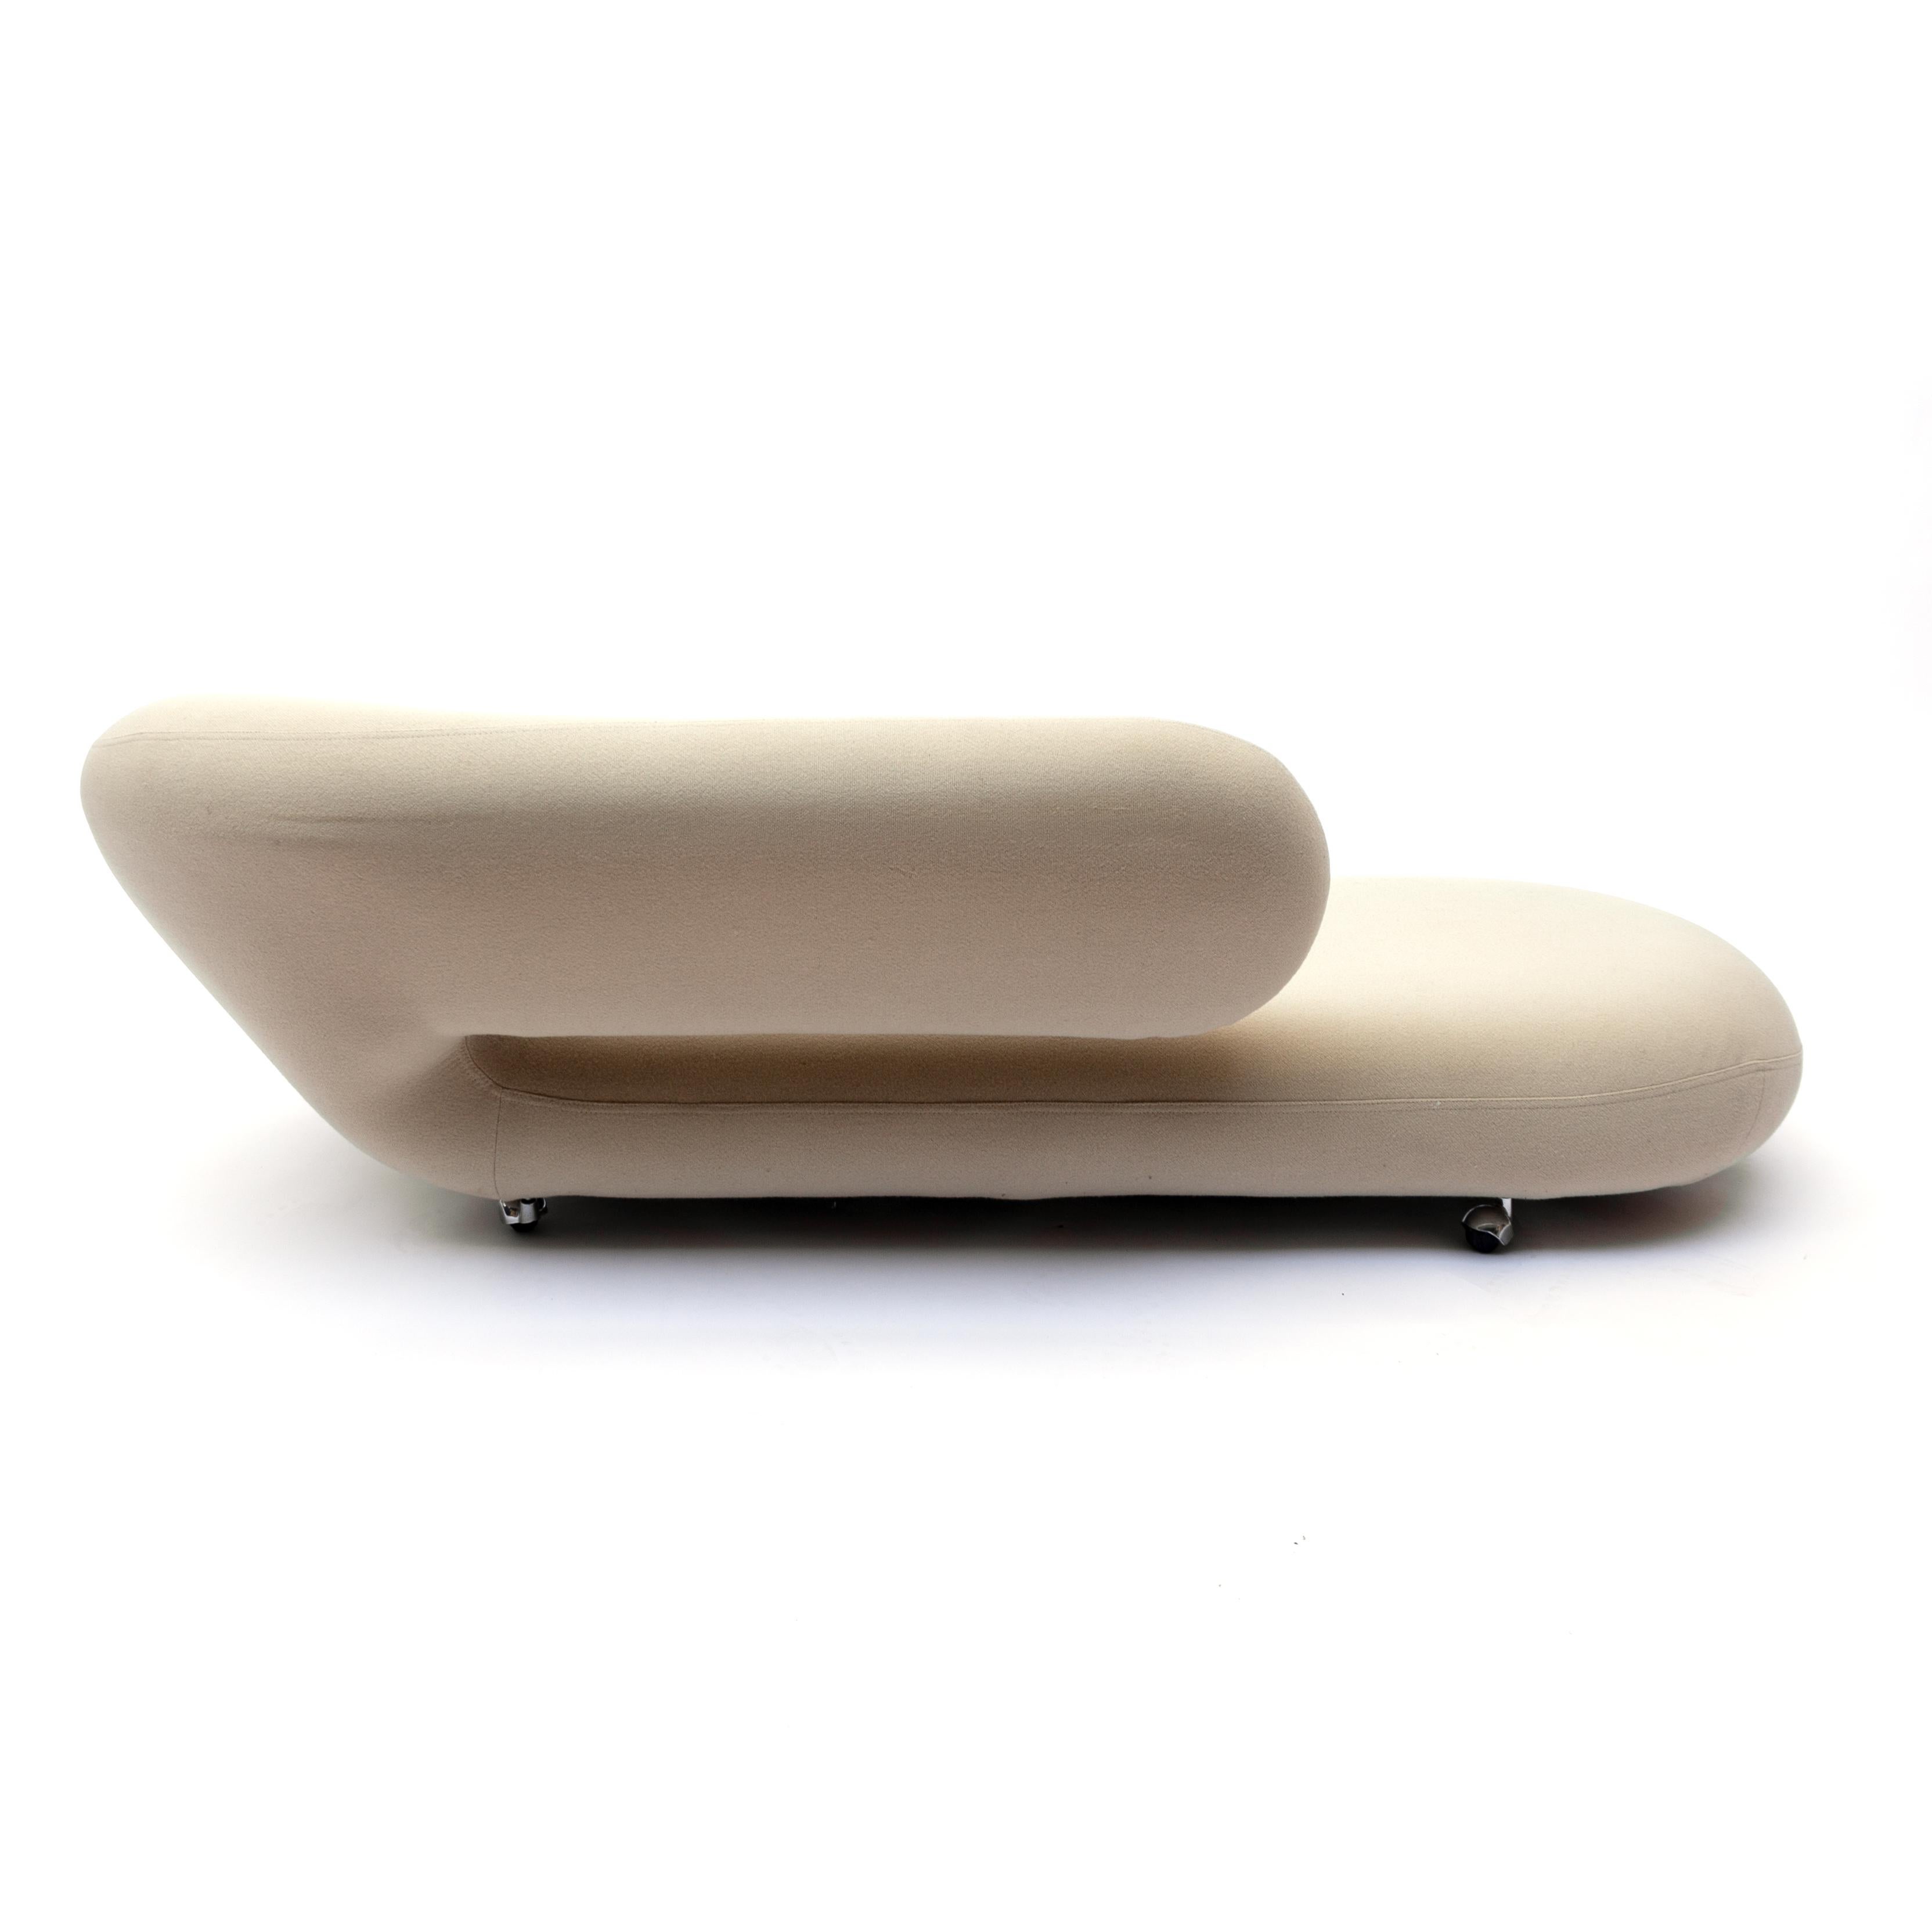 Countless designers have been inspired by the IDEA behind the chaise longue. Here is the interpretation of Geoffrey Harcourt from 1970. A perfect seat on which to stretch out and unwind. A monument in the modern interior. Also known as Cleopatra.